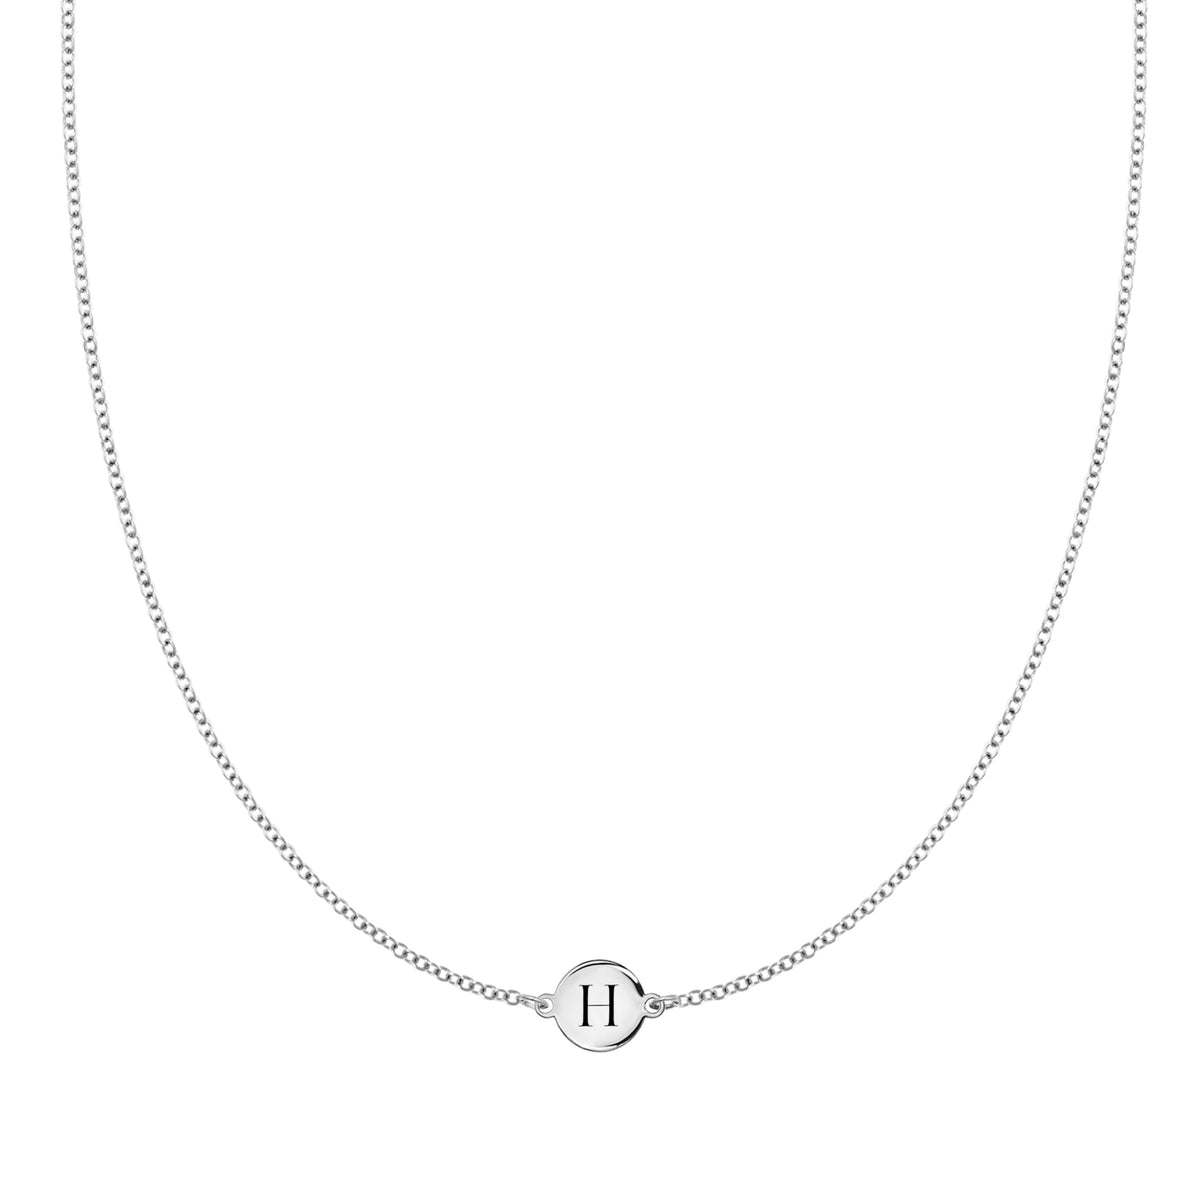 Pave H Initial Necklace CZ Stone Silver Pendant Letter H Initial Silver H  Initial Necklace Dainty Sterling Silver Chain Custom - Etsy | Initial  necklace silver, Initial necklace, Necklace